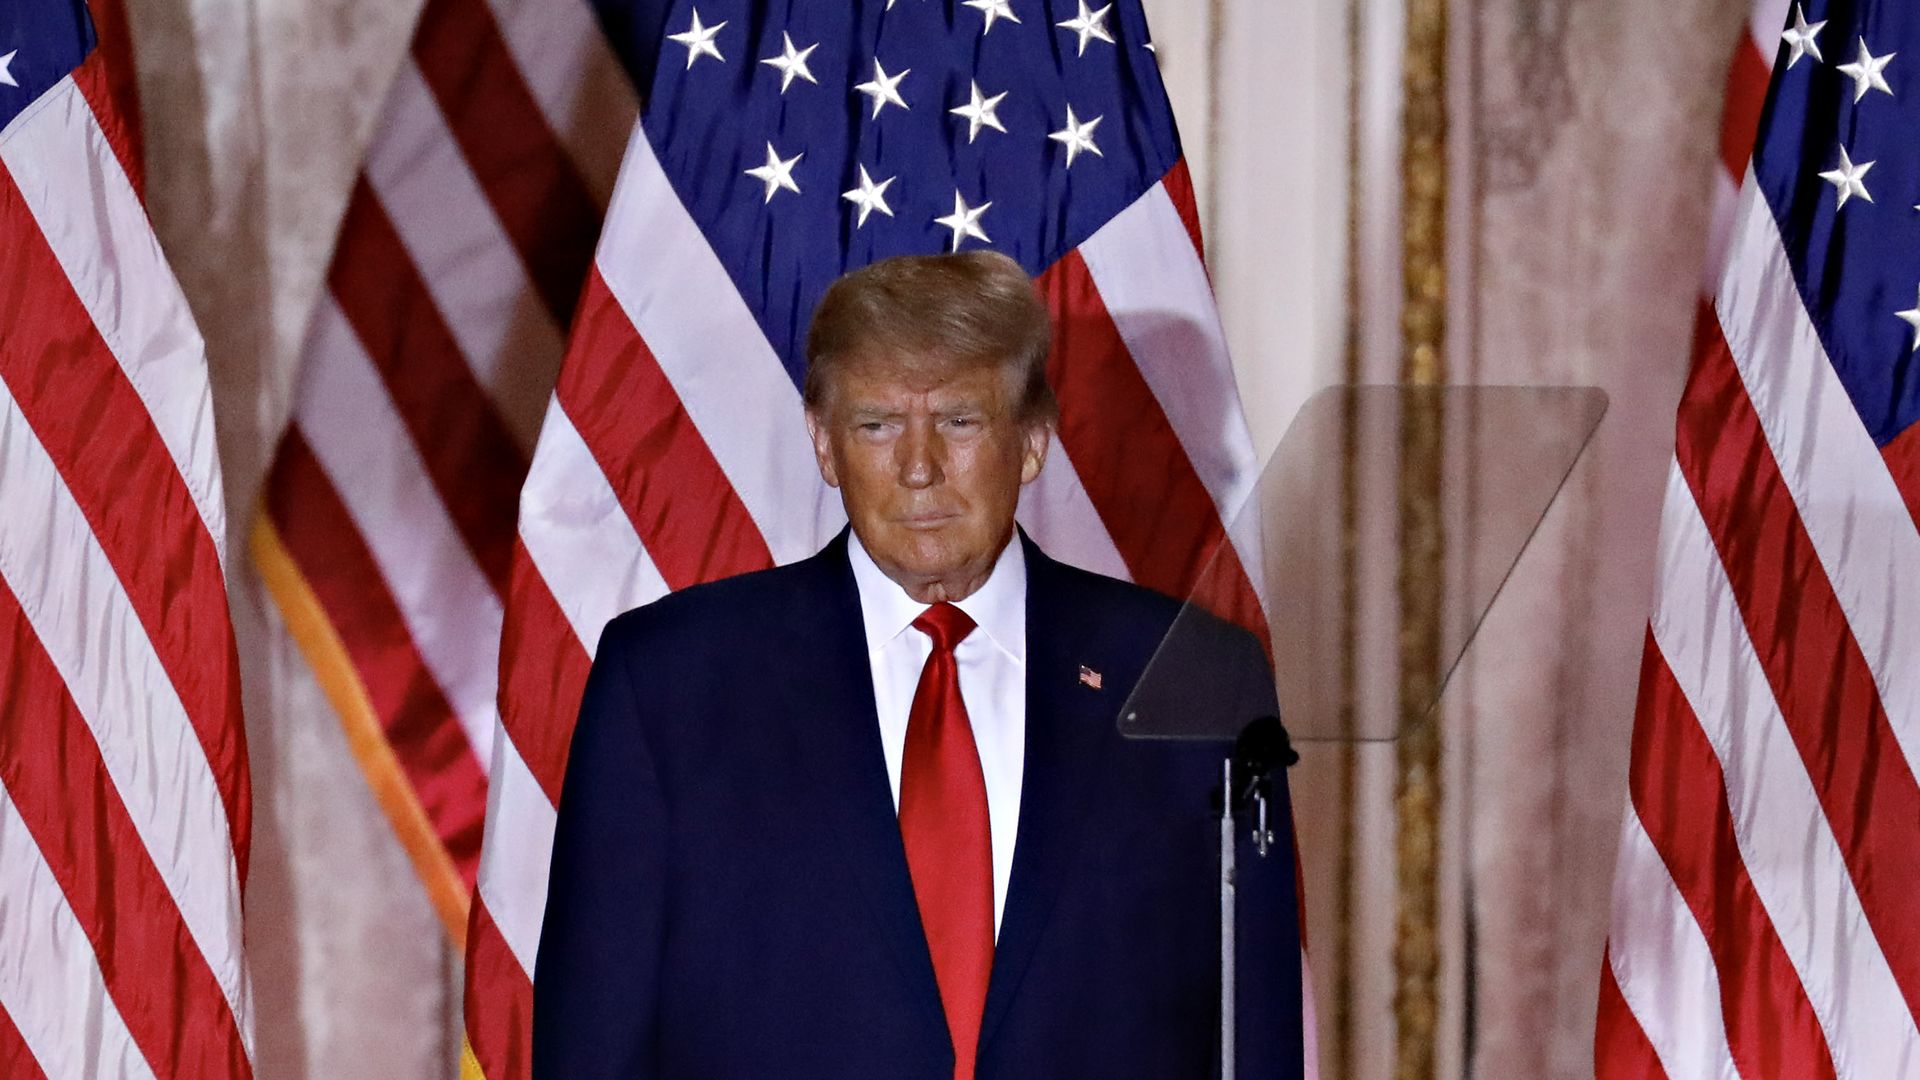 Former President Trump formally entered the 2024 US presidential race Tuesday. Photo: Eva Marie Uzcategui/Bloomberg via Getty Images